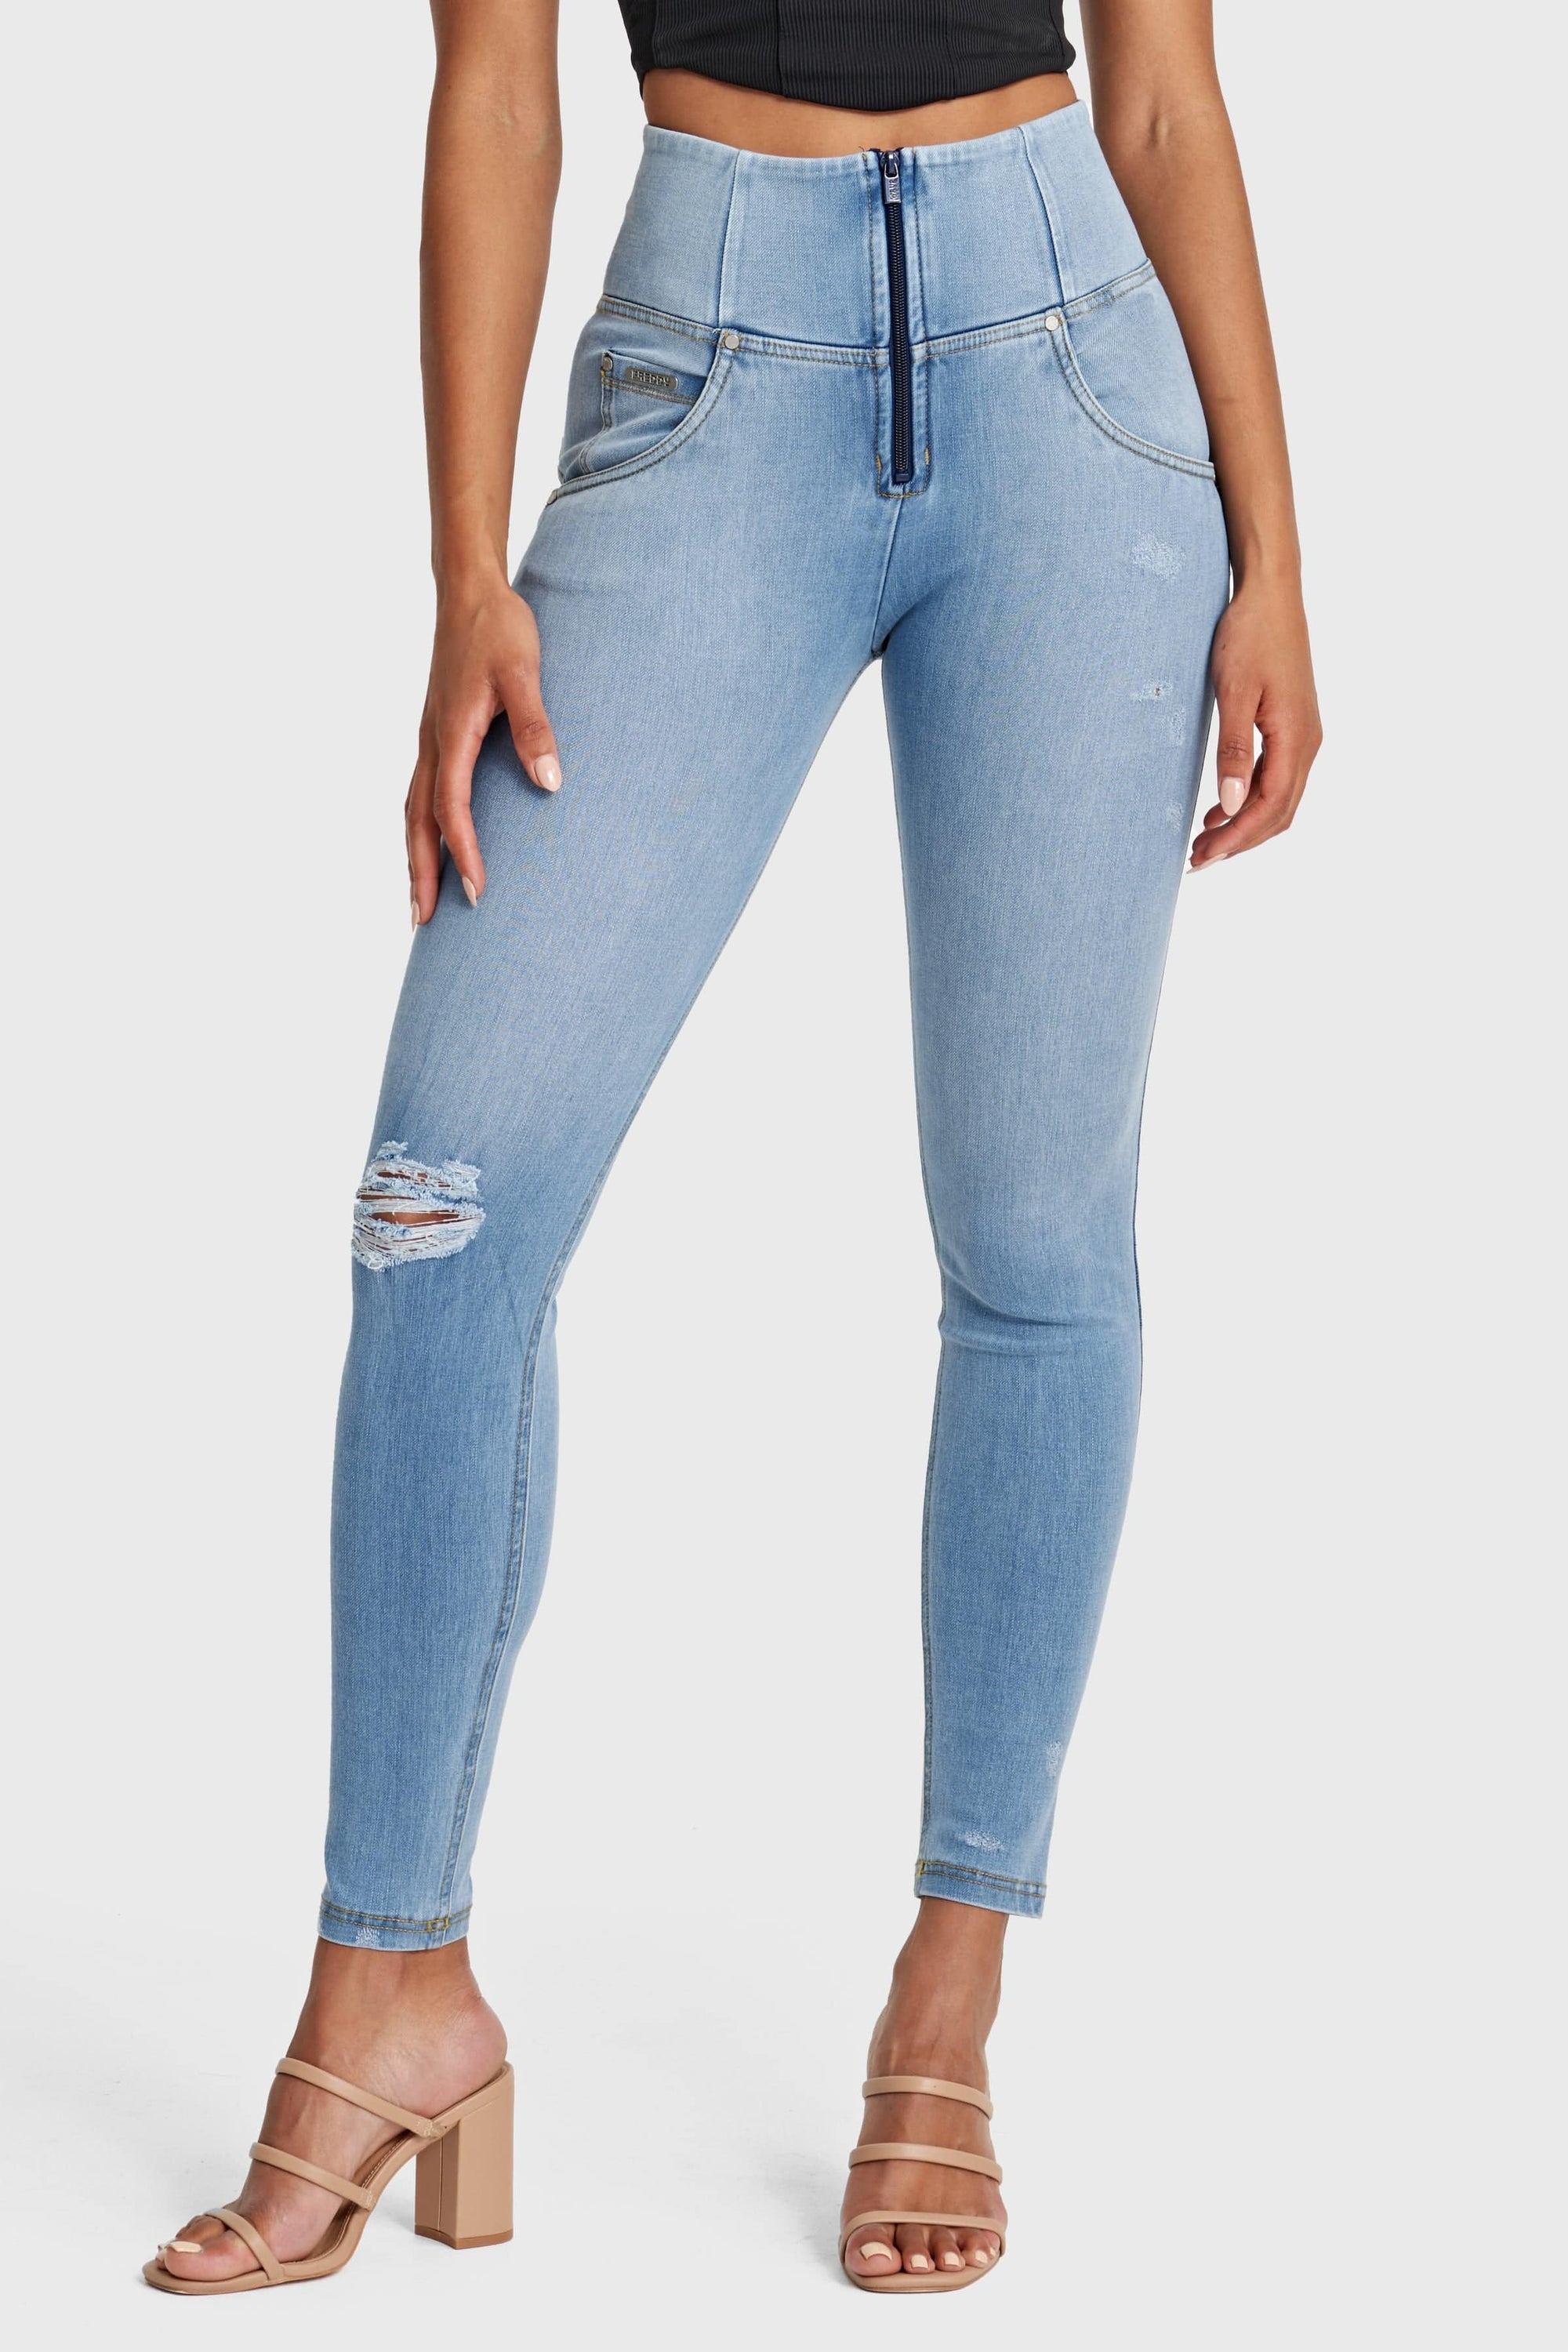 WR.UP® Snug Distressed Jeans - High Waisted - Full Length - Light Blue + Yellow Stitching 3